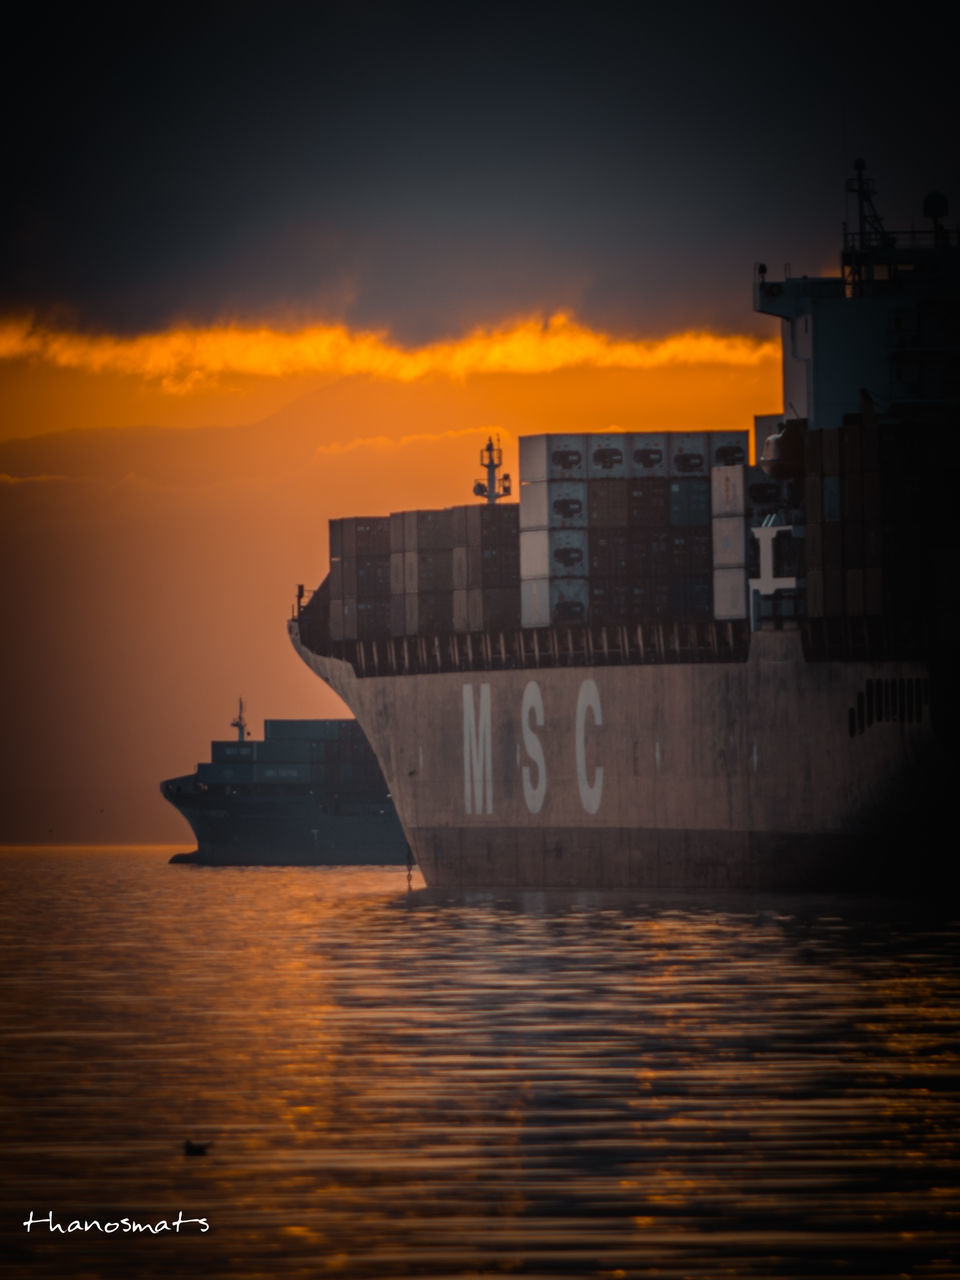 VIEW OF SHIP AT SUNSET